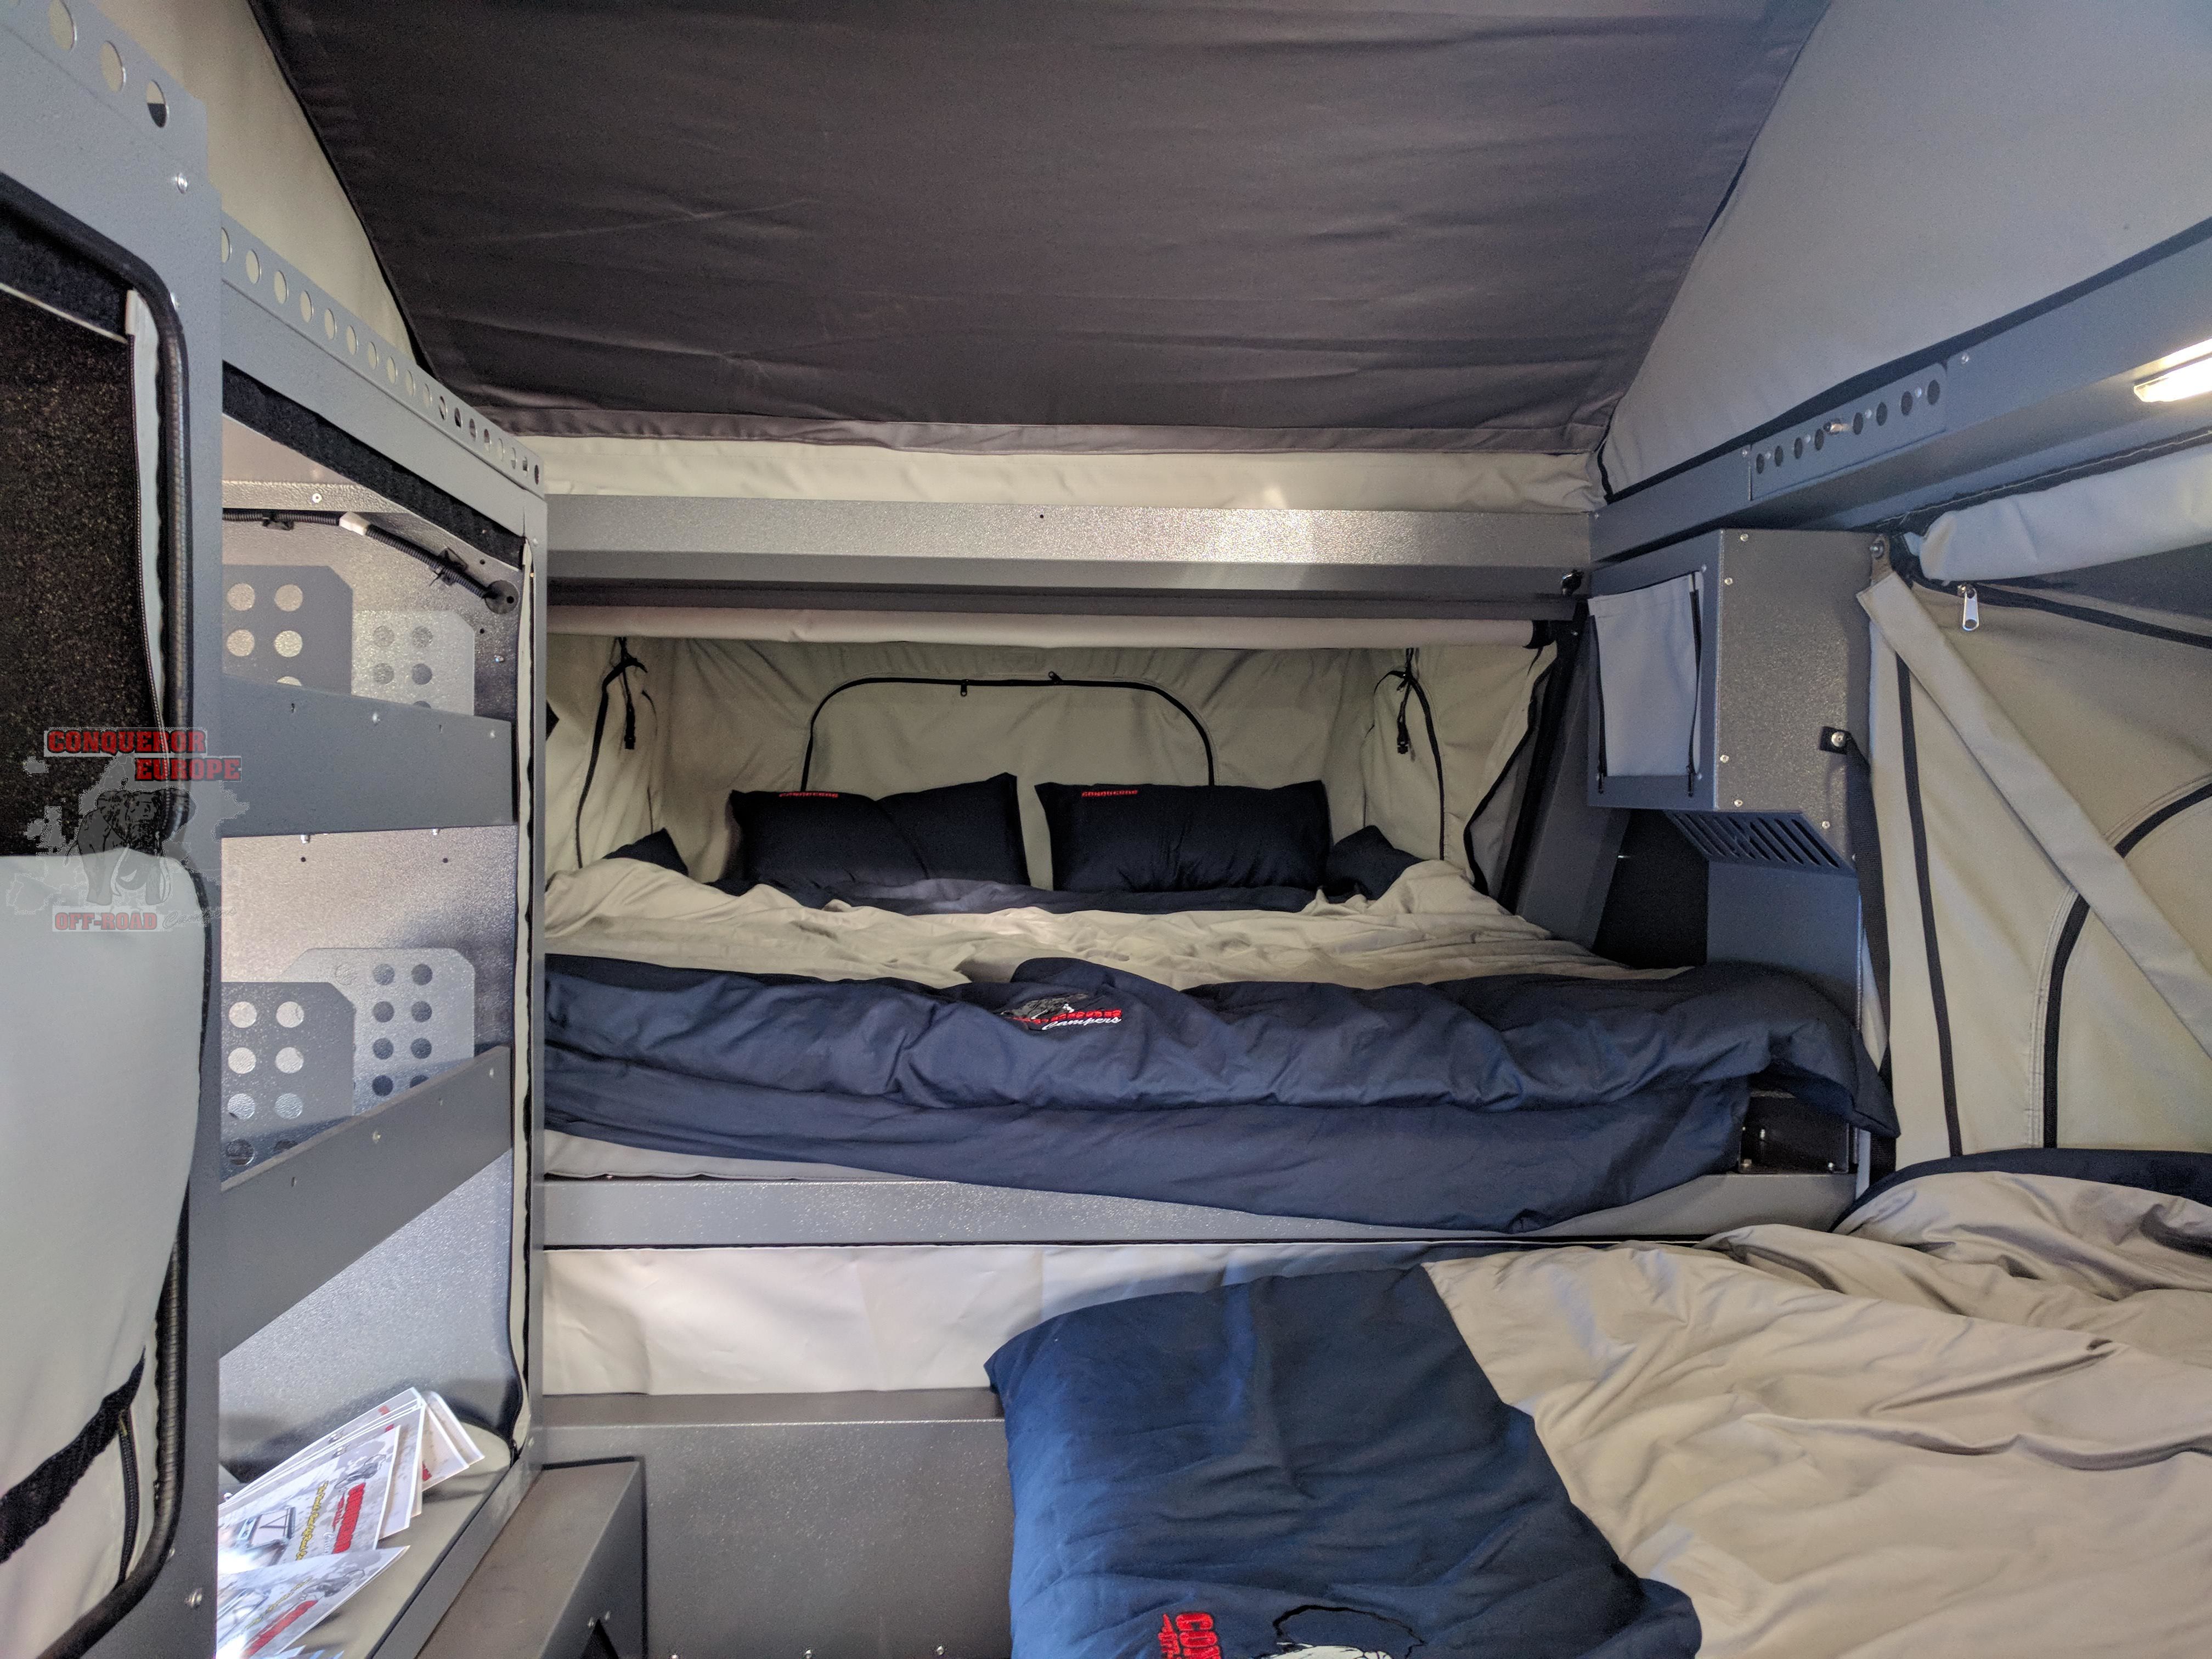 Inside, front bed and side bed to the right